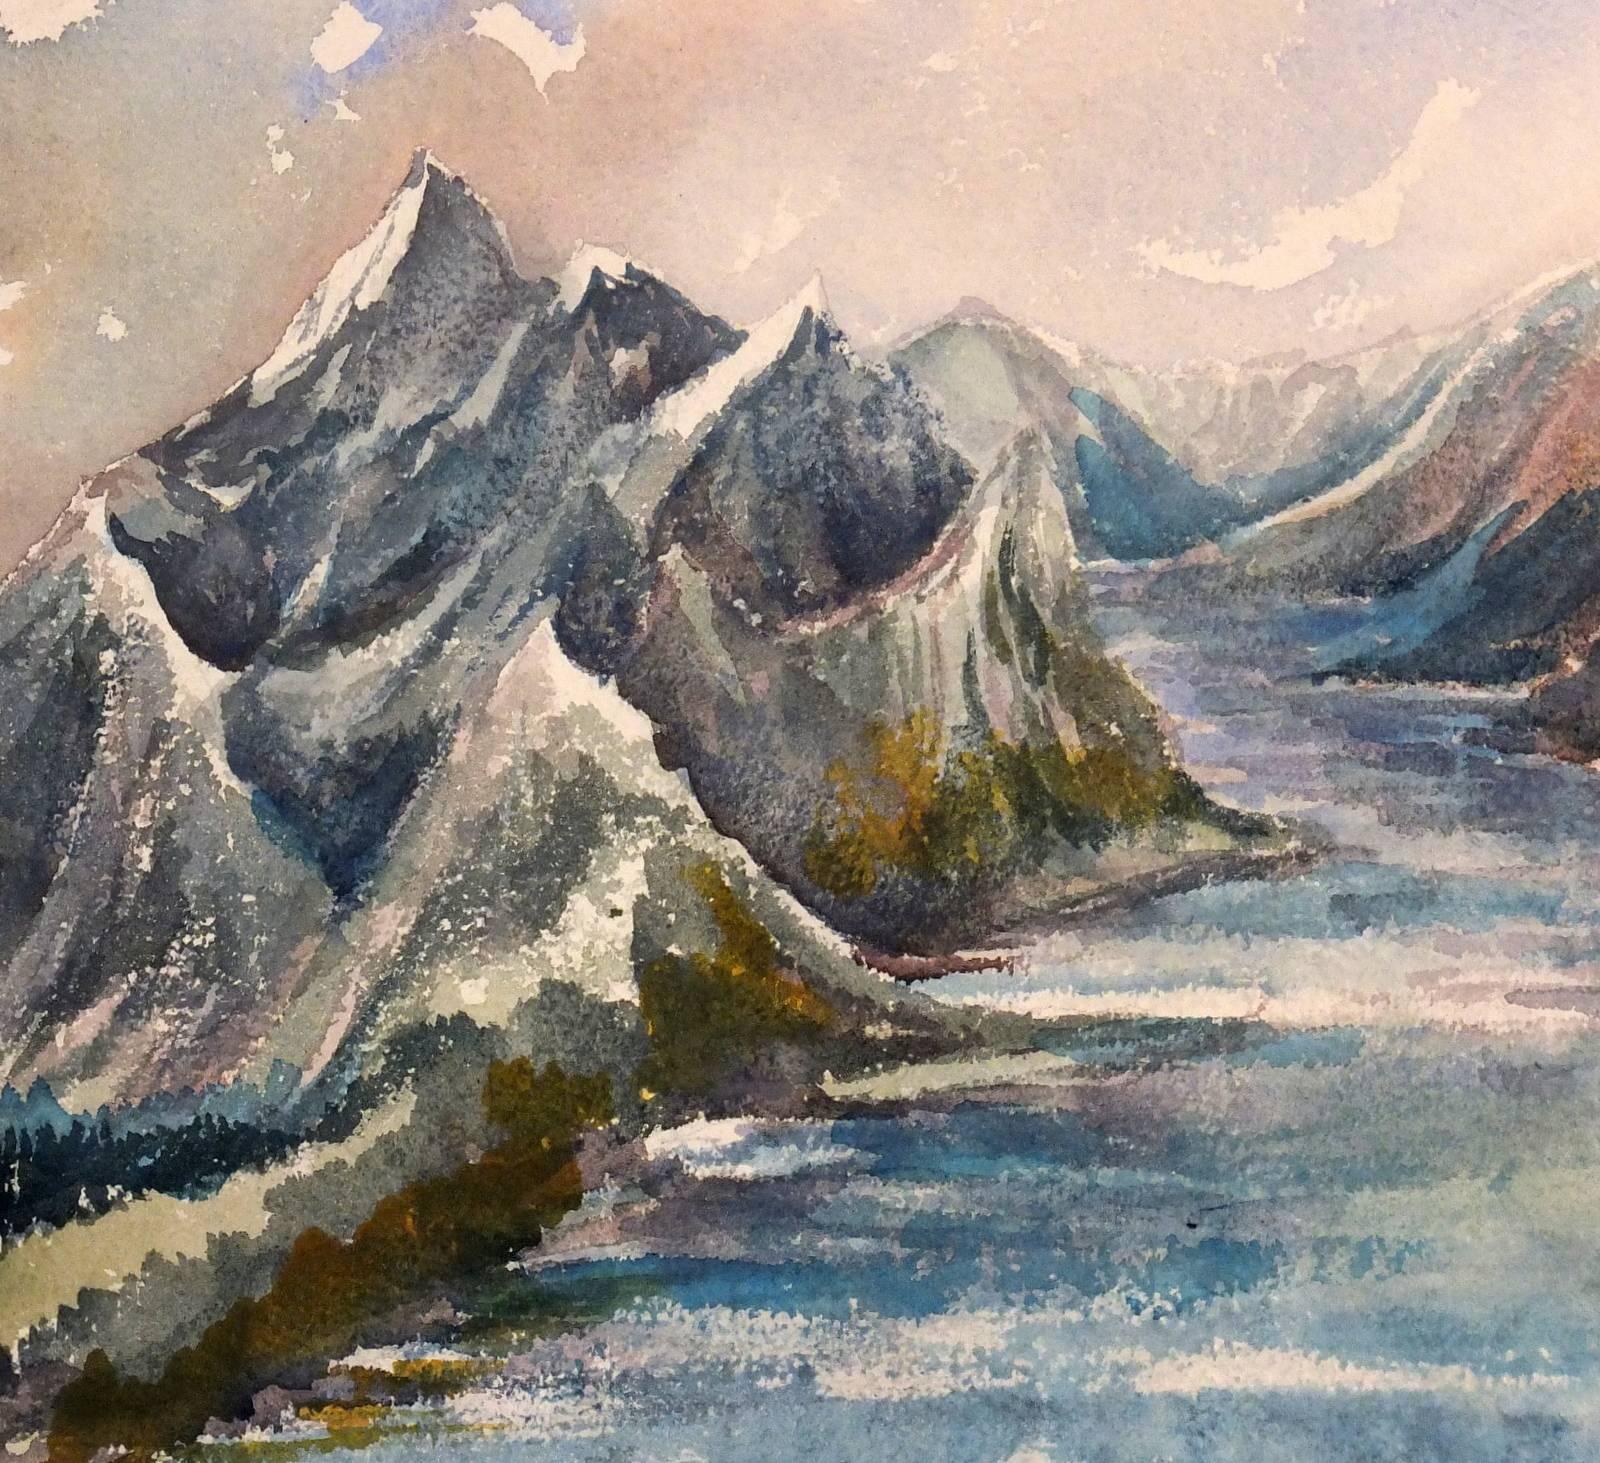 Watercolor Painting - High Alpine Lake Landscape - Art by Alfred Siegris